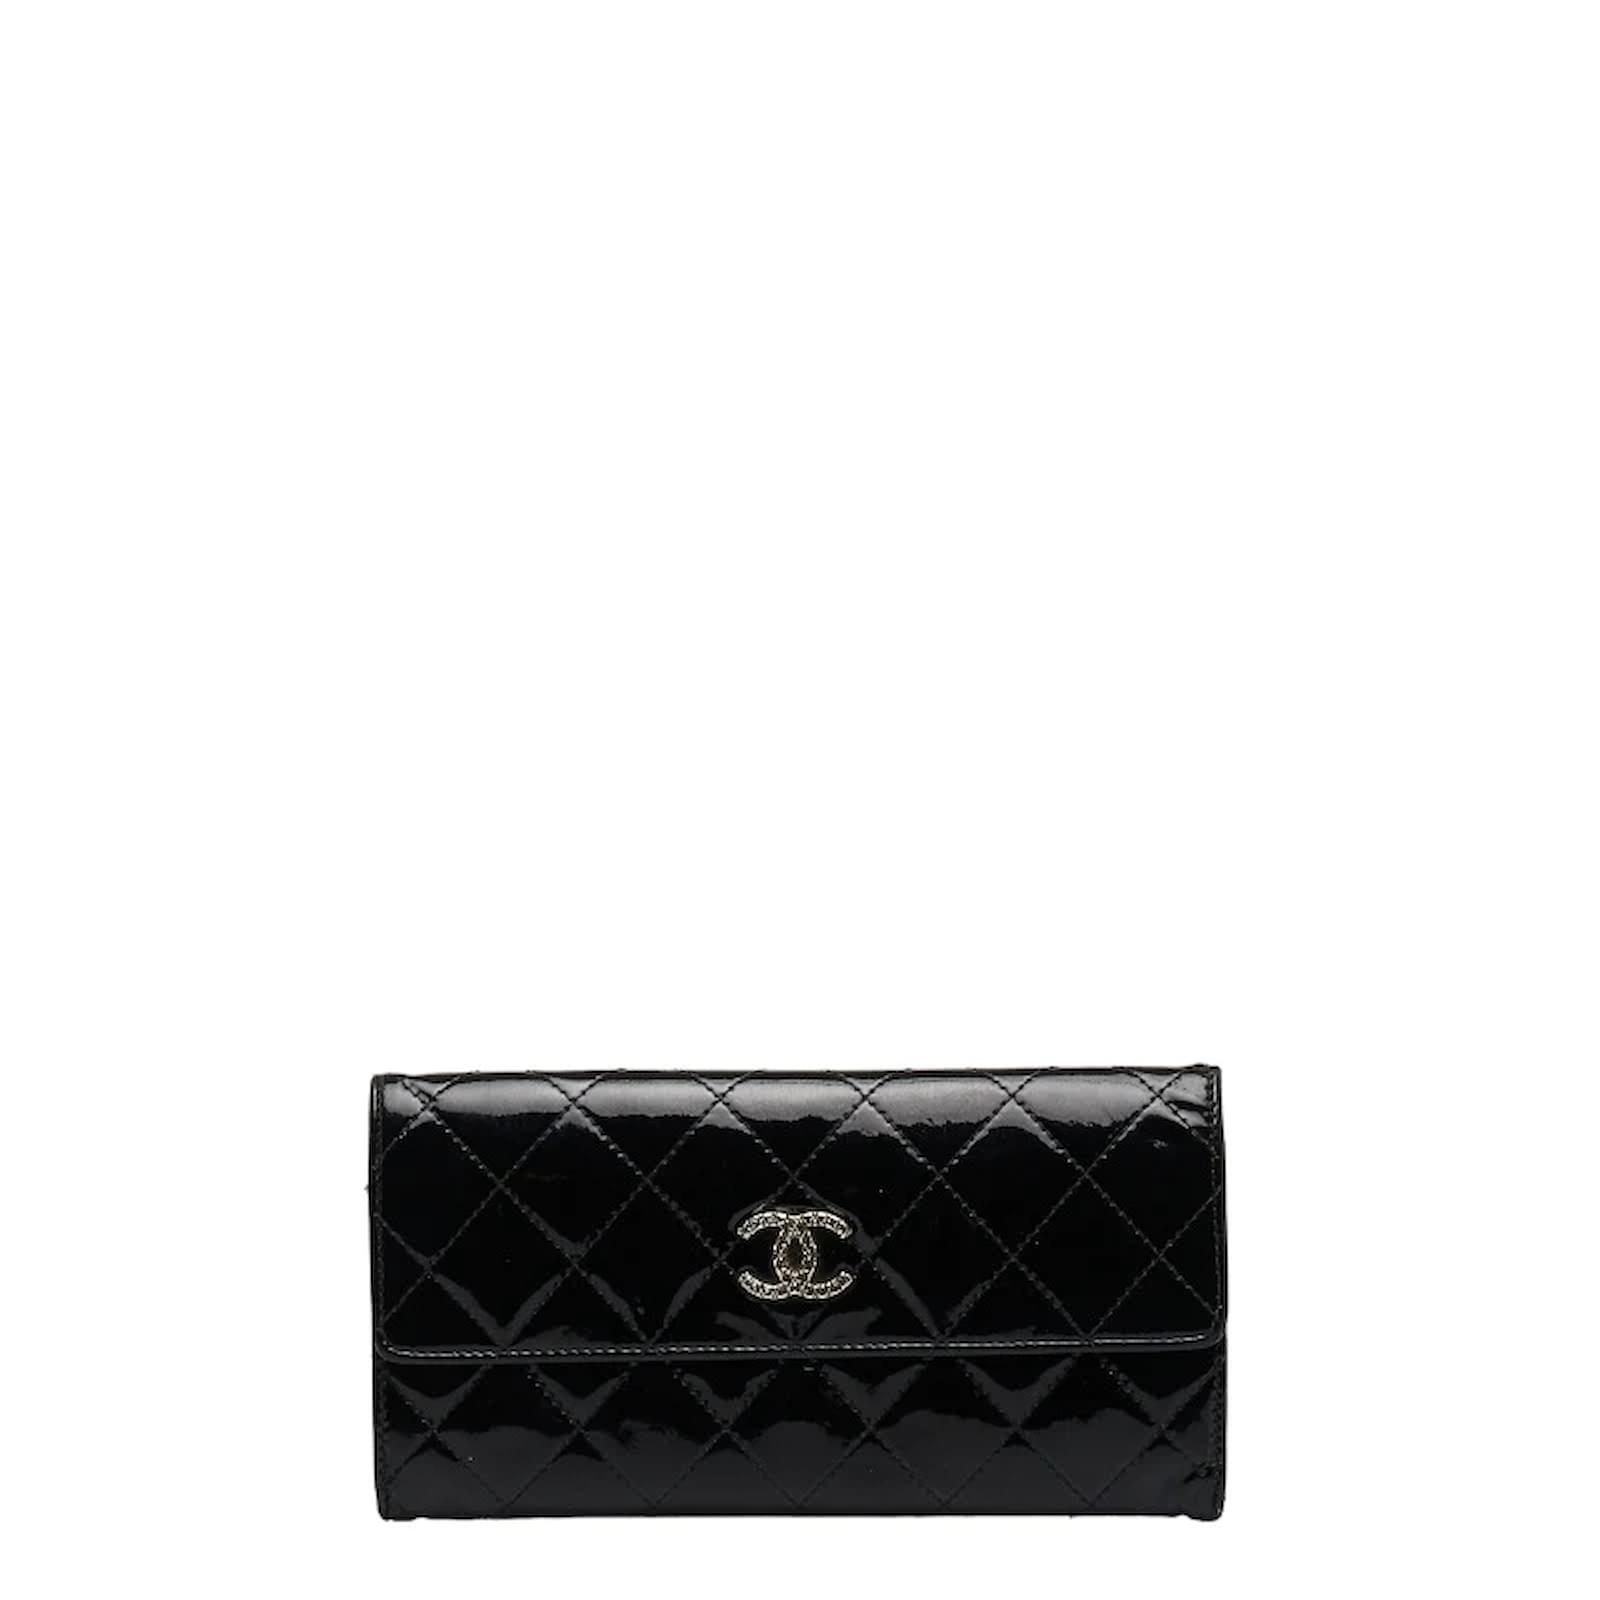 CHANEL Quilted Large Bags & Handbags for Women, Authenticity Guaranteed